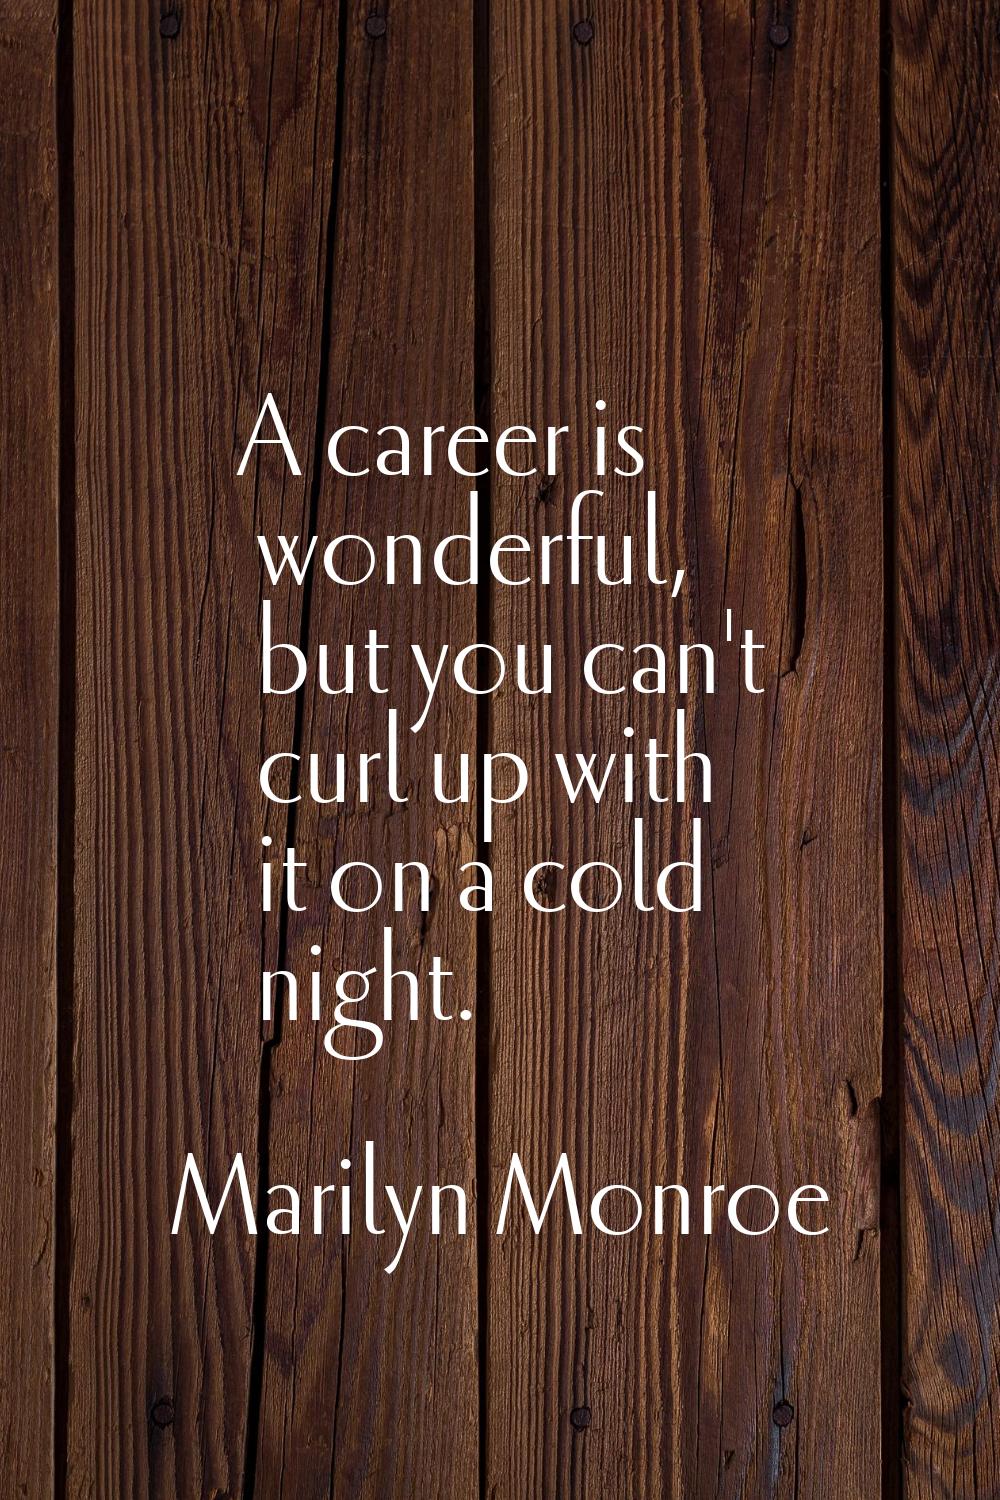 A career is wonderful, but you can't curl up with it on a cold night.